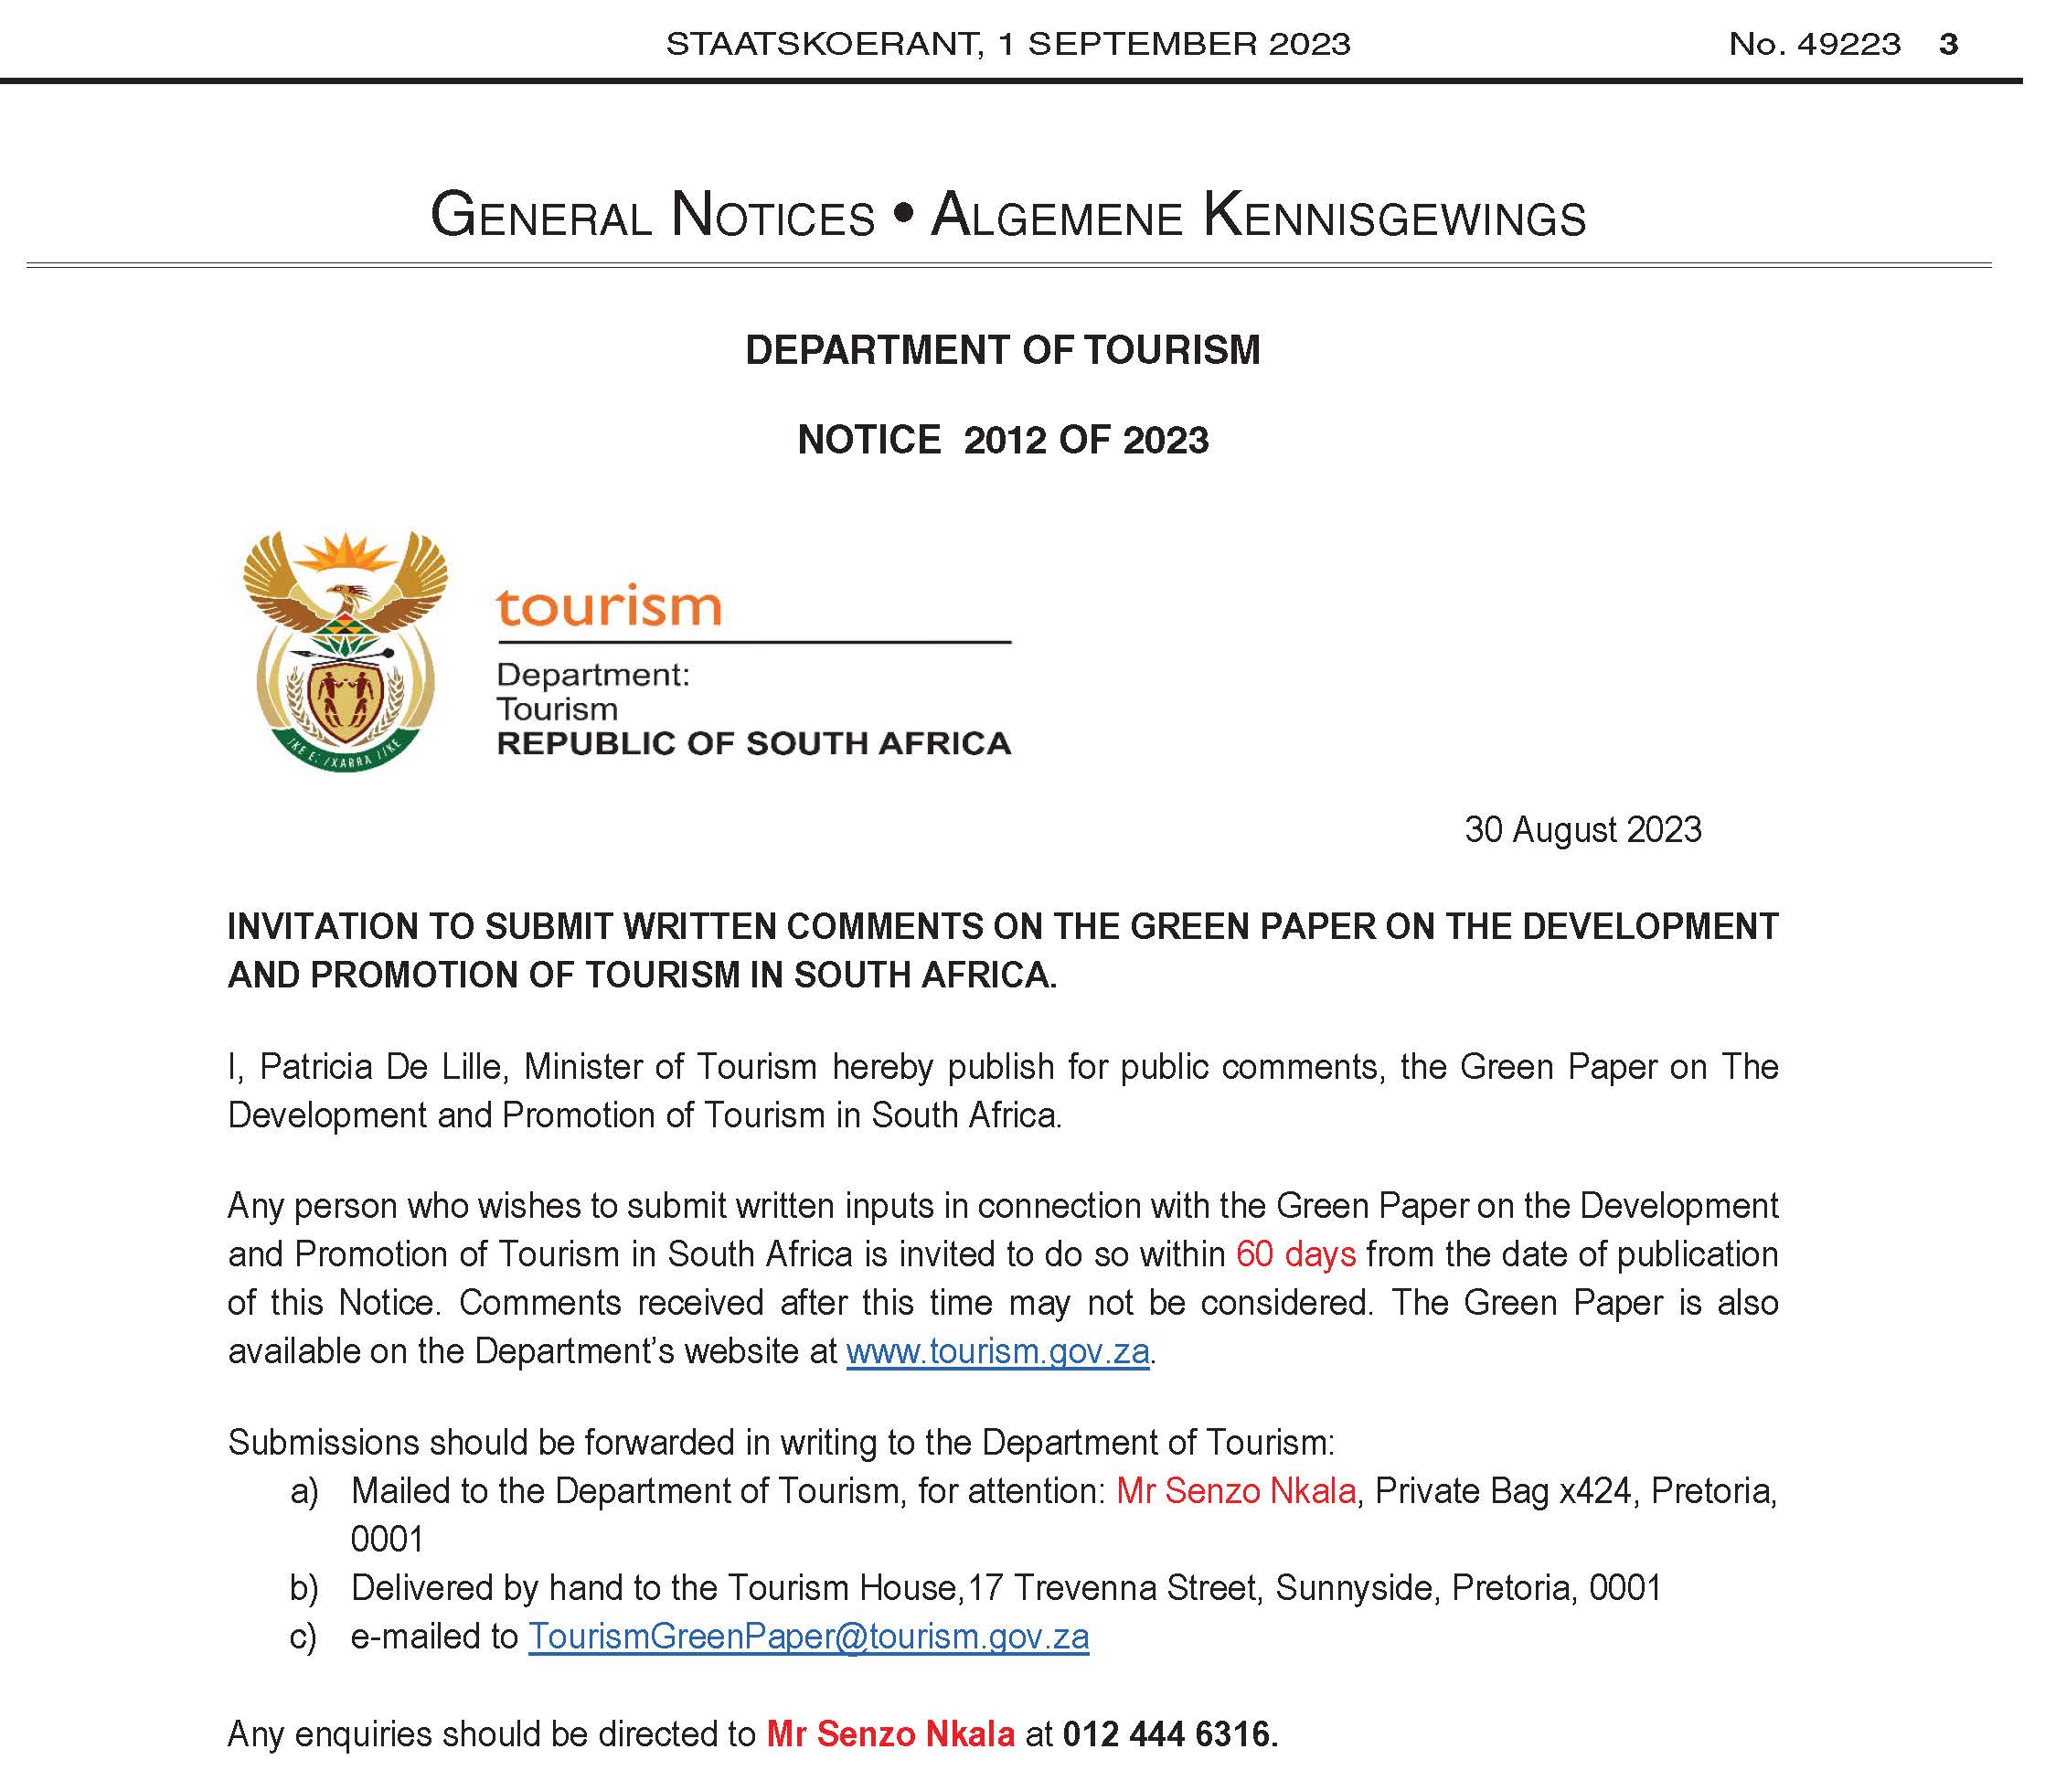 Minister de Lille encourages the public to comment on the Green Paper on the Development and Promotion of Tourism in South Afric